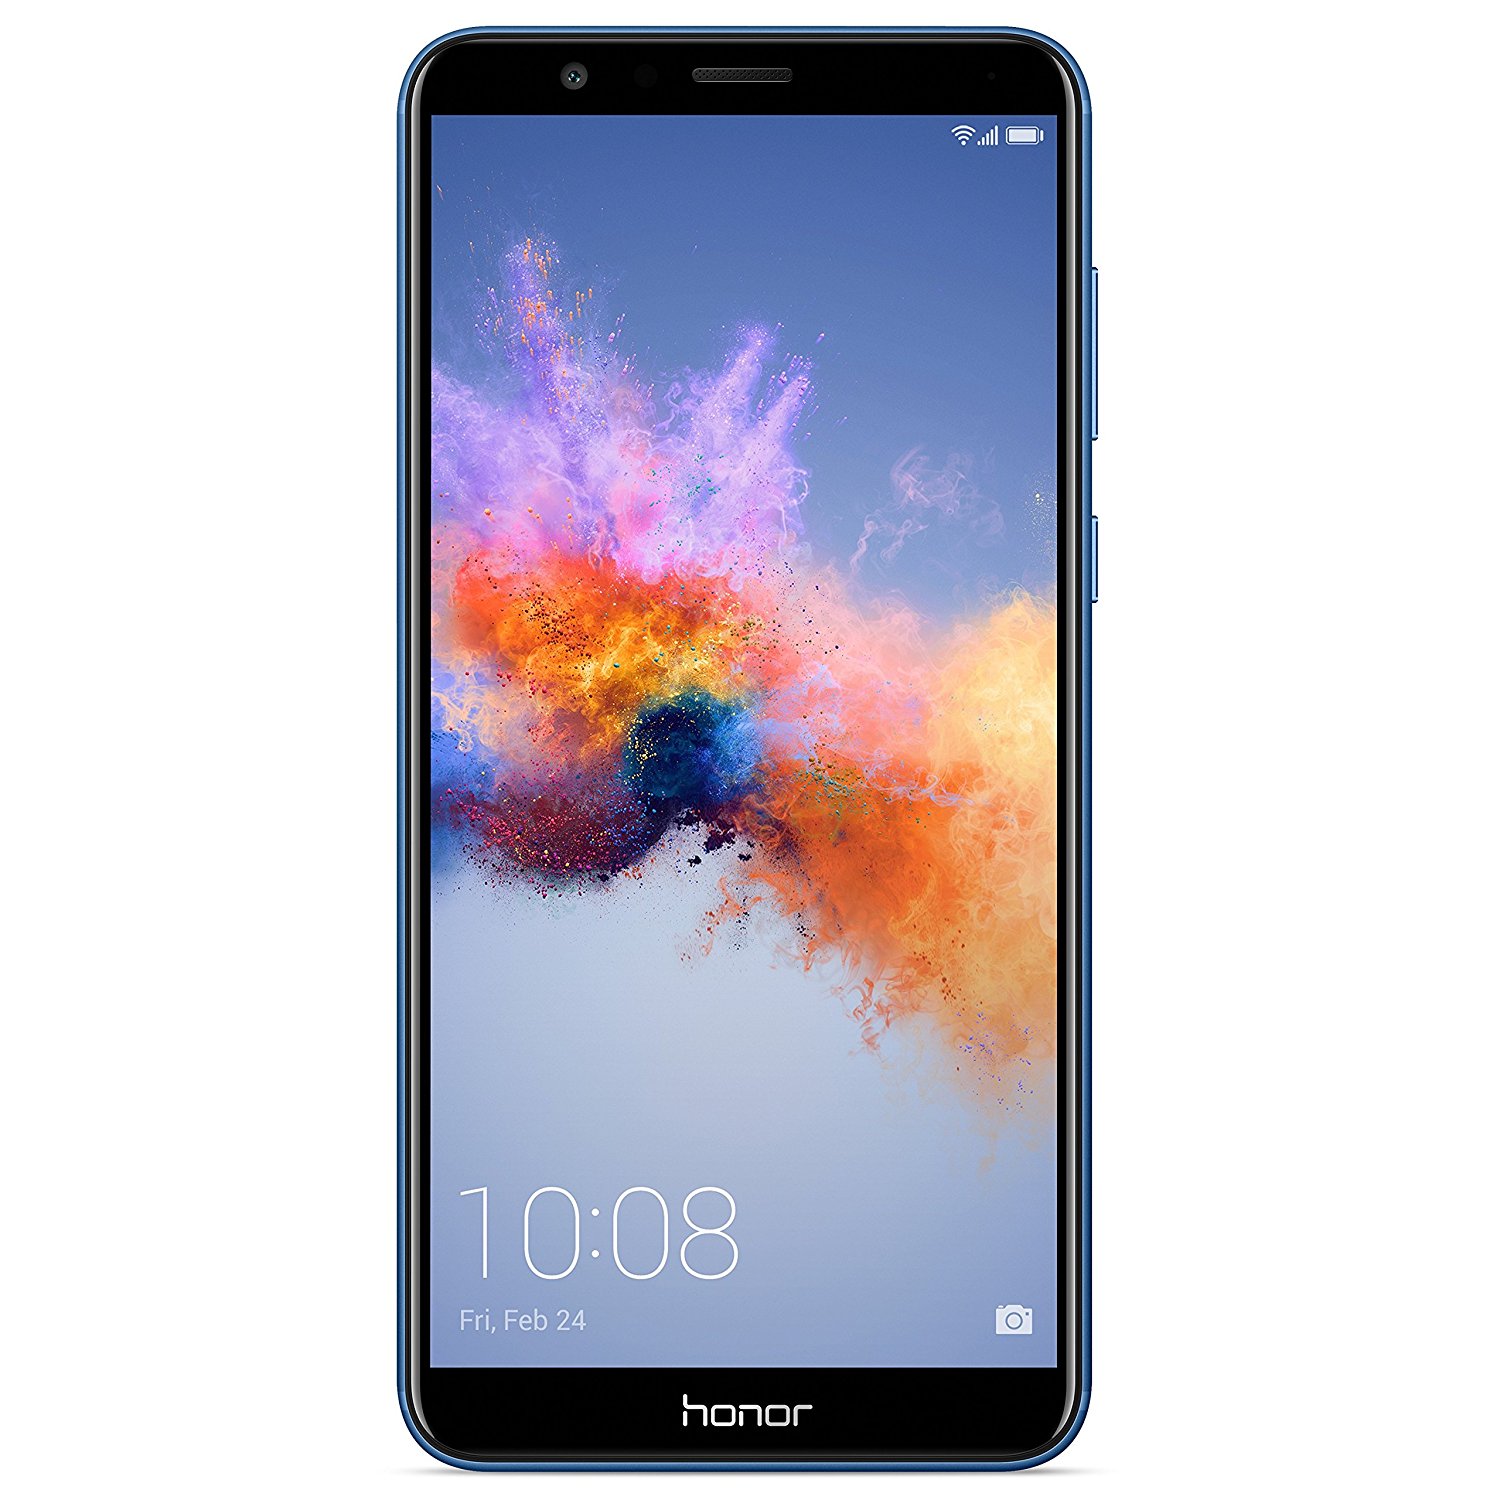 honor 7X exchange offer